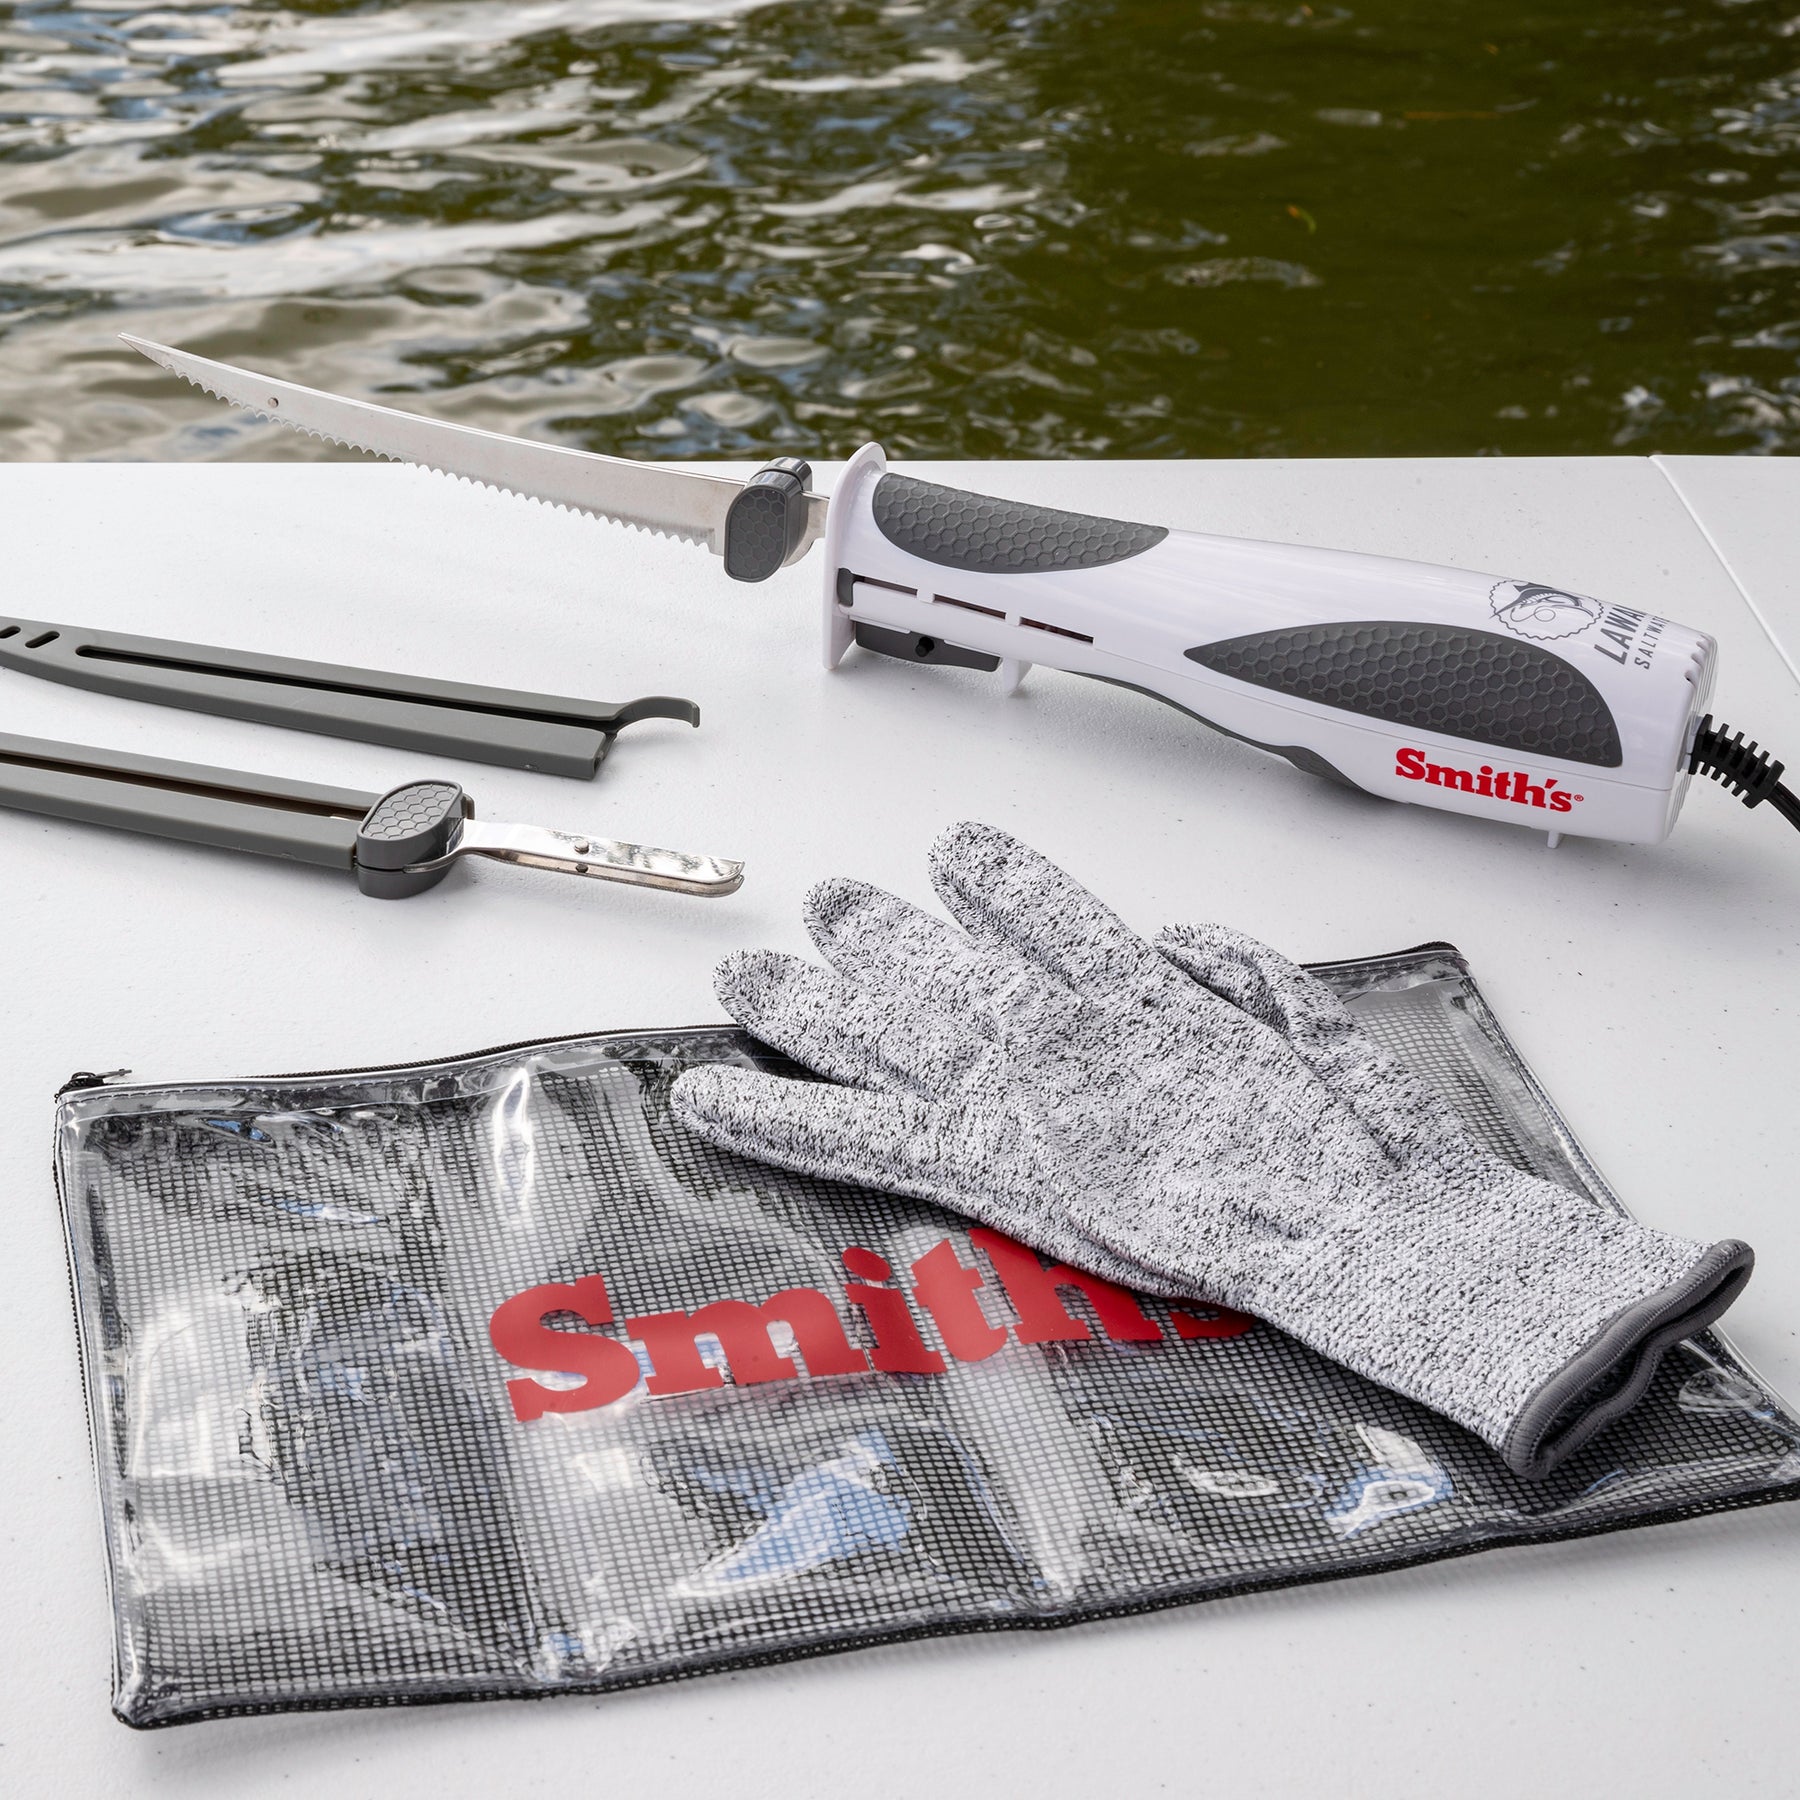 Smith's Electric Fillet Knife